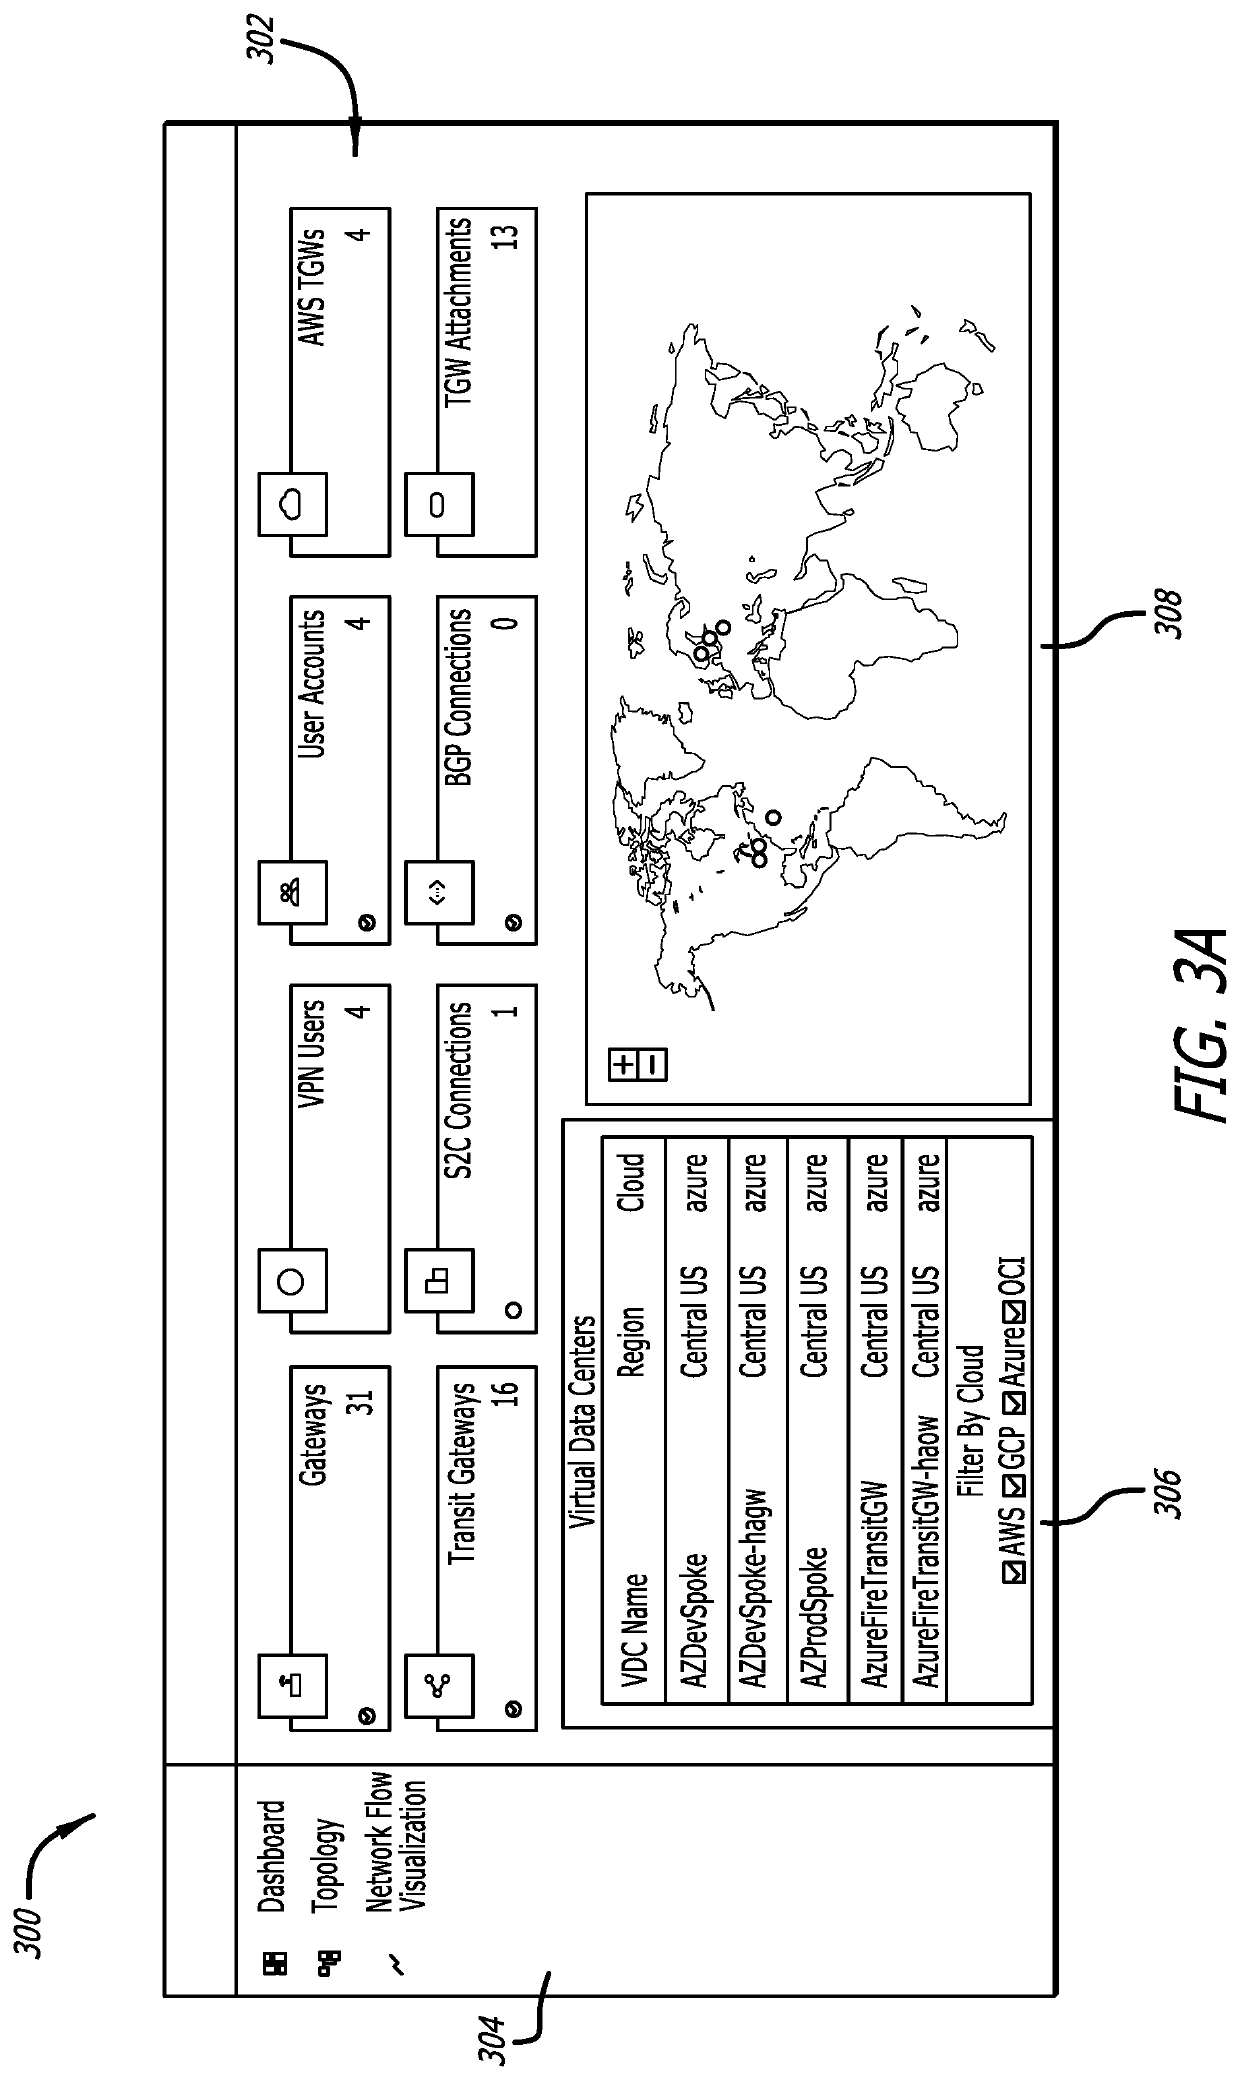 System and method for determination of network operation metrics and generation of network operation metrics visualizations